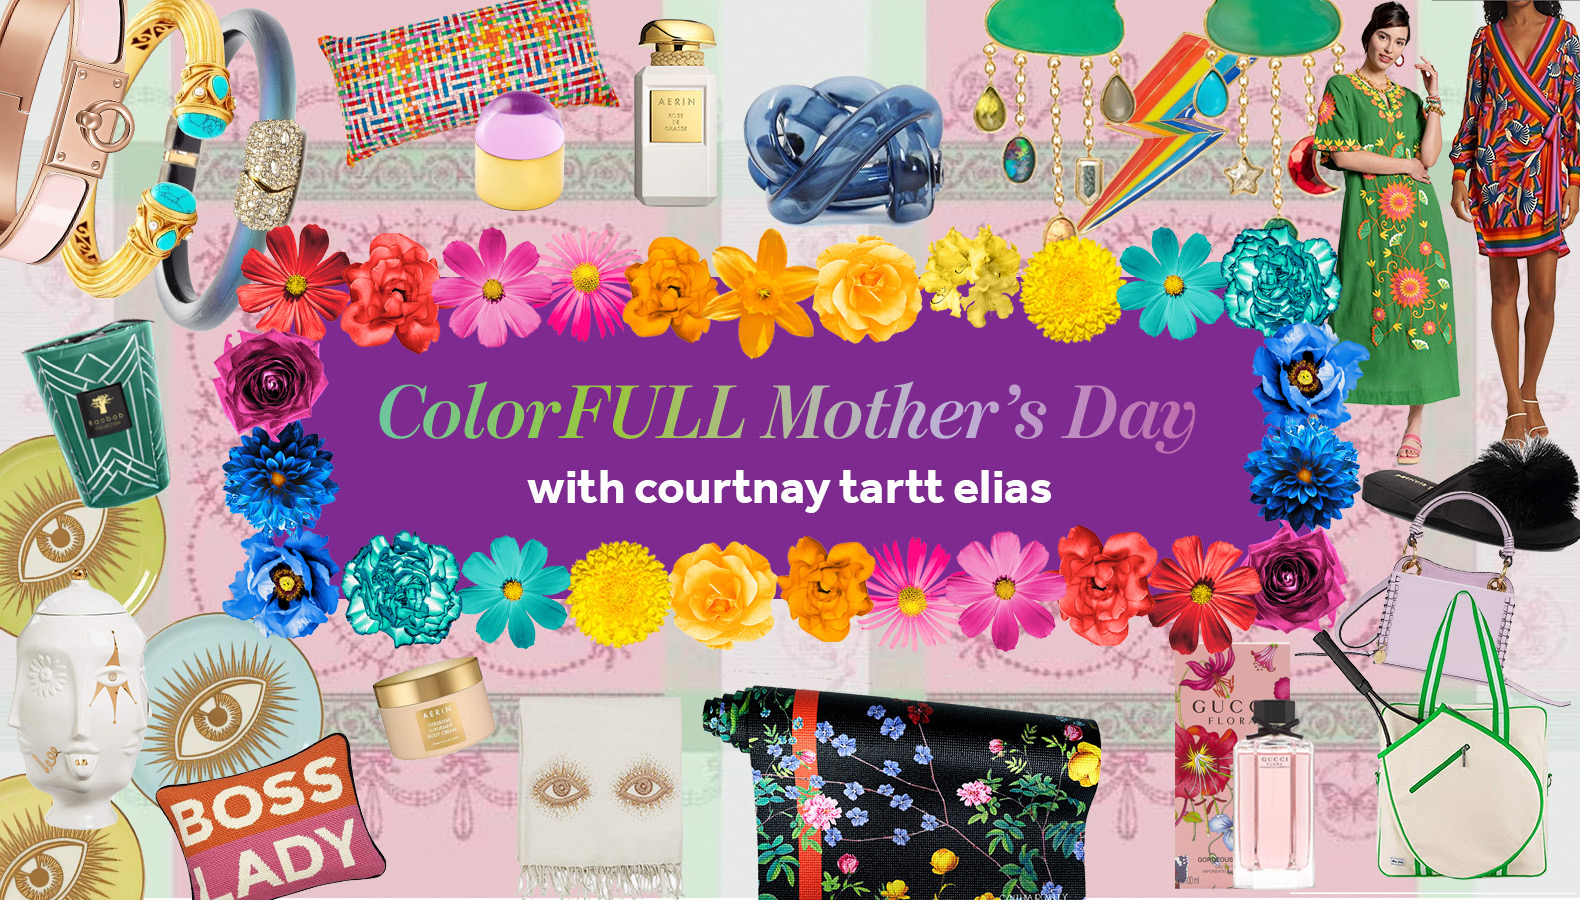 Colorful Shopping Mother's Day Gifts